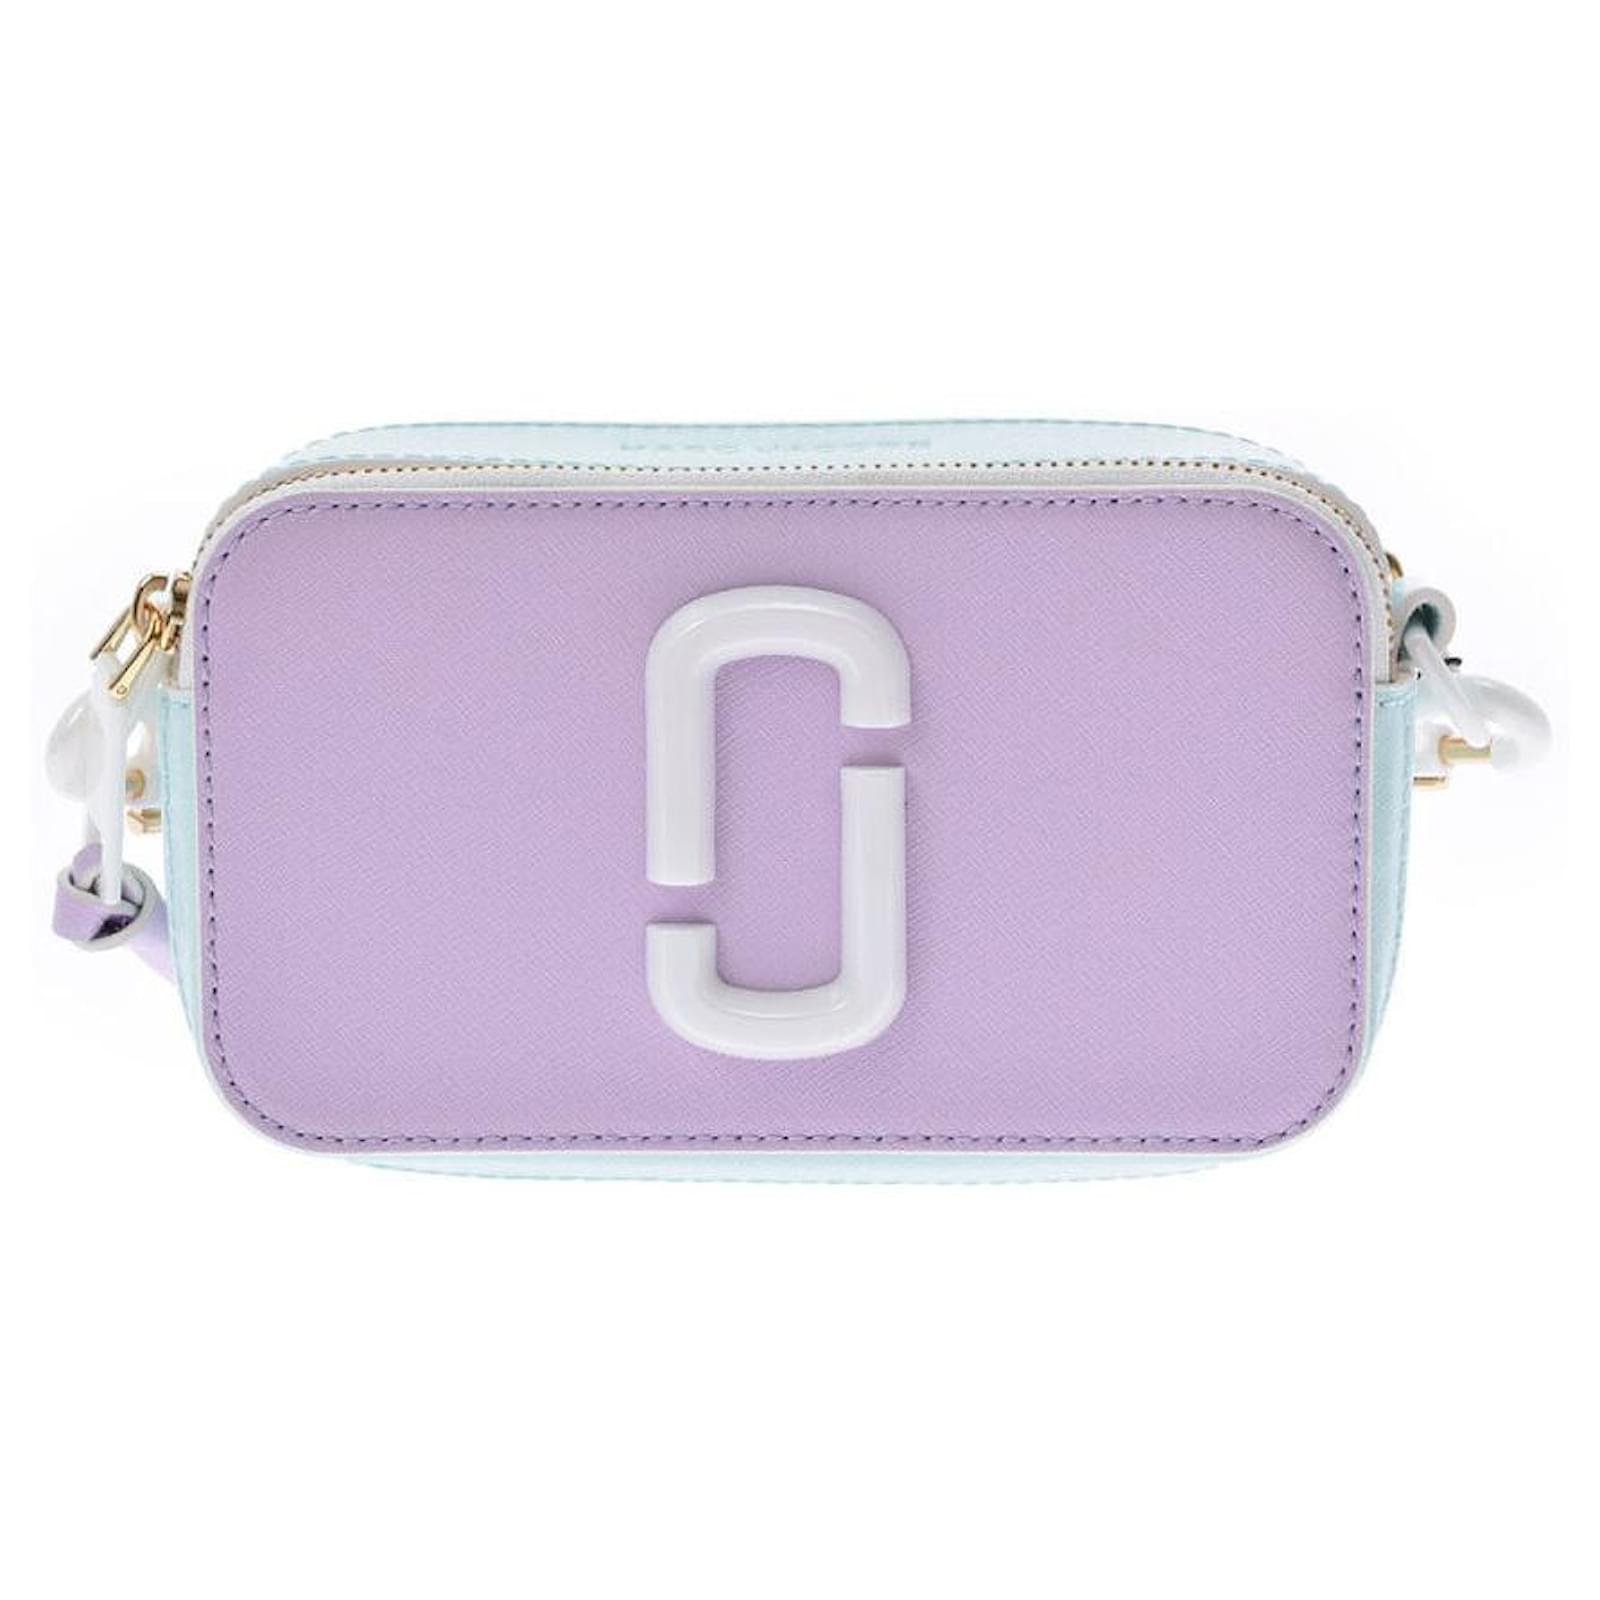 Marc Jacobs Women's Snapshot Camera Bag, Baby Pink, One Size